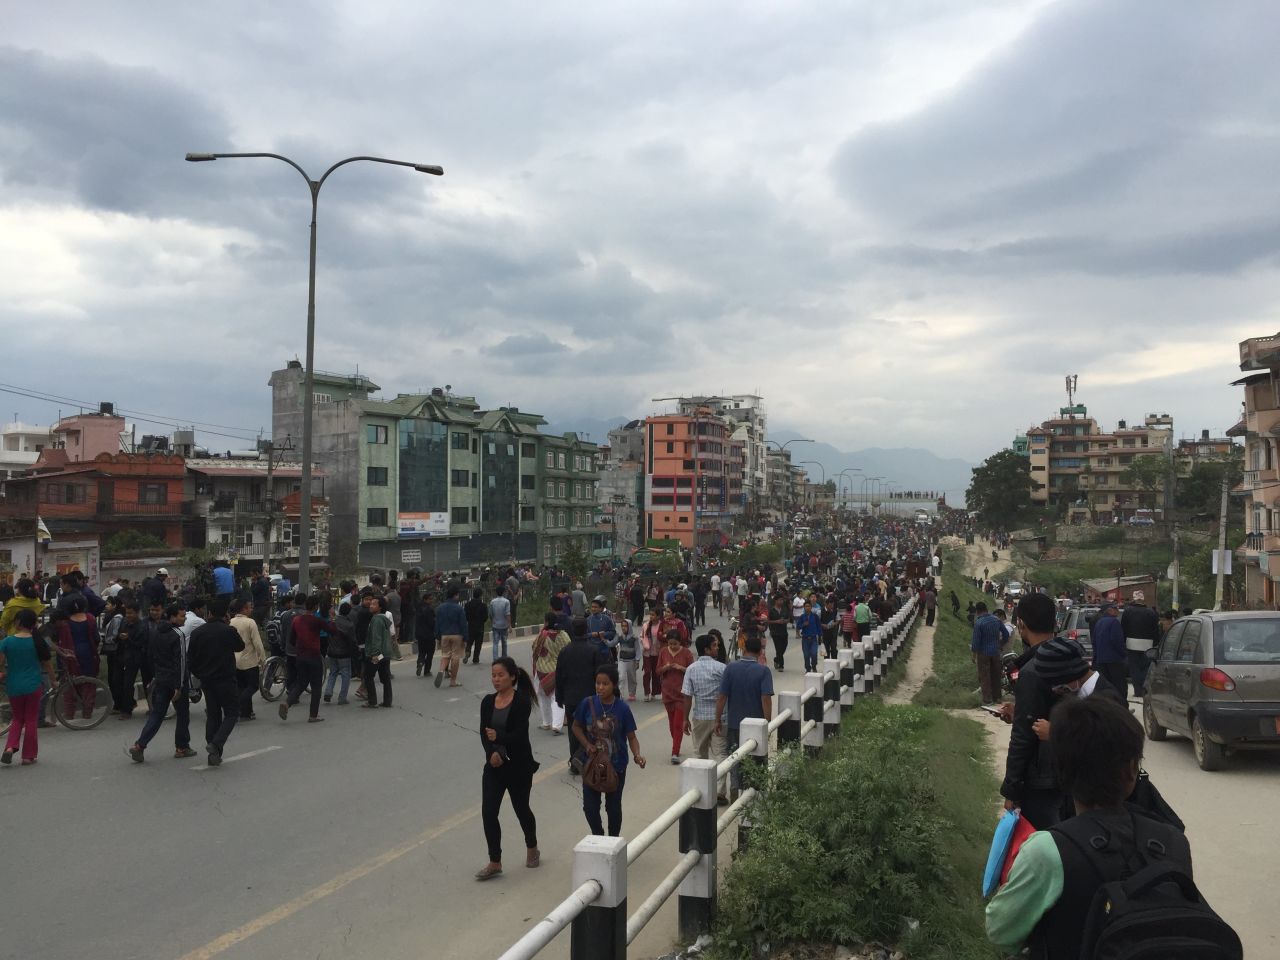 Young says people gathered in the street after the quake and repeated aftershocks.